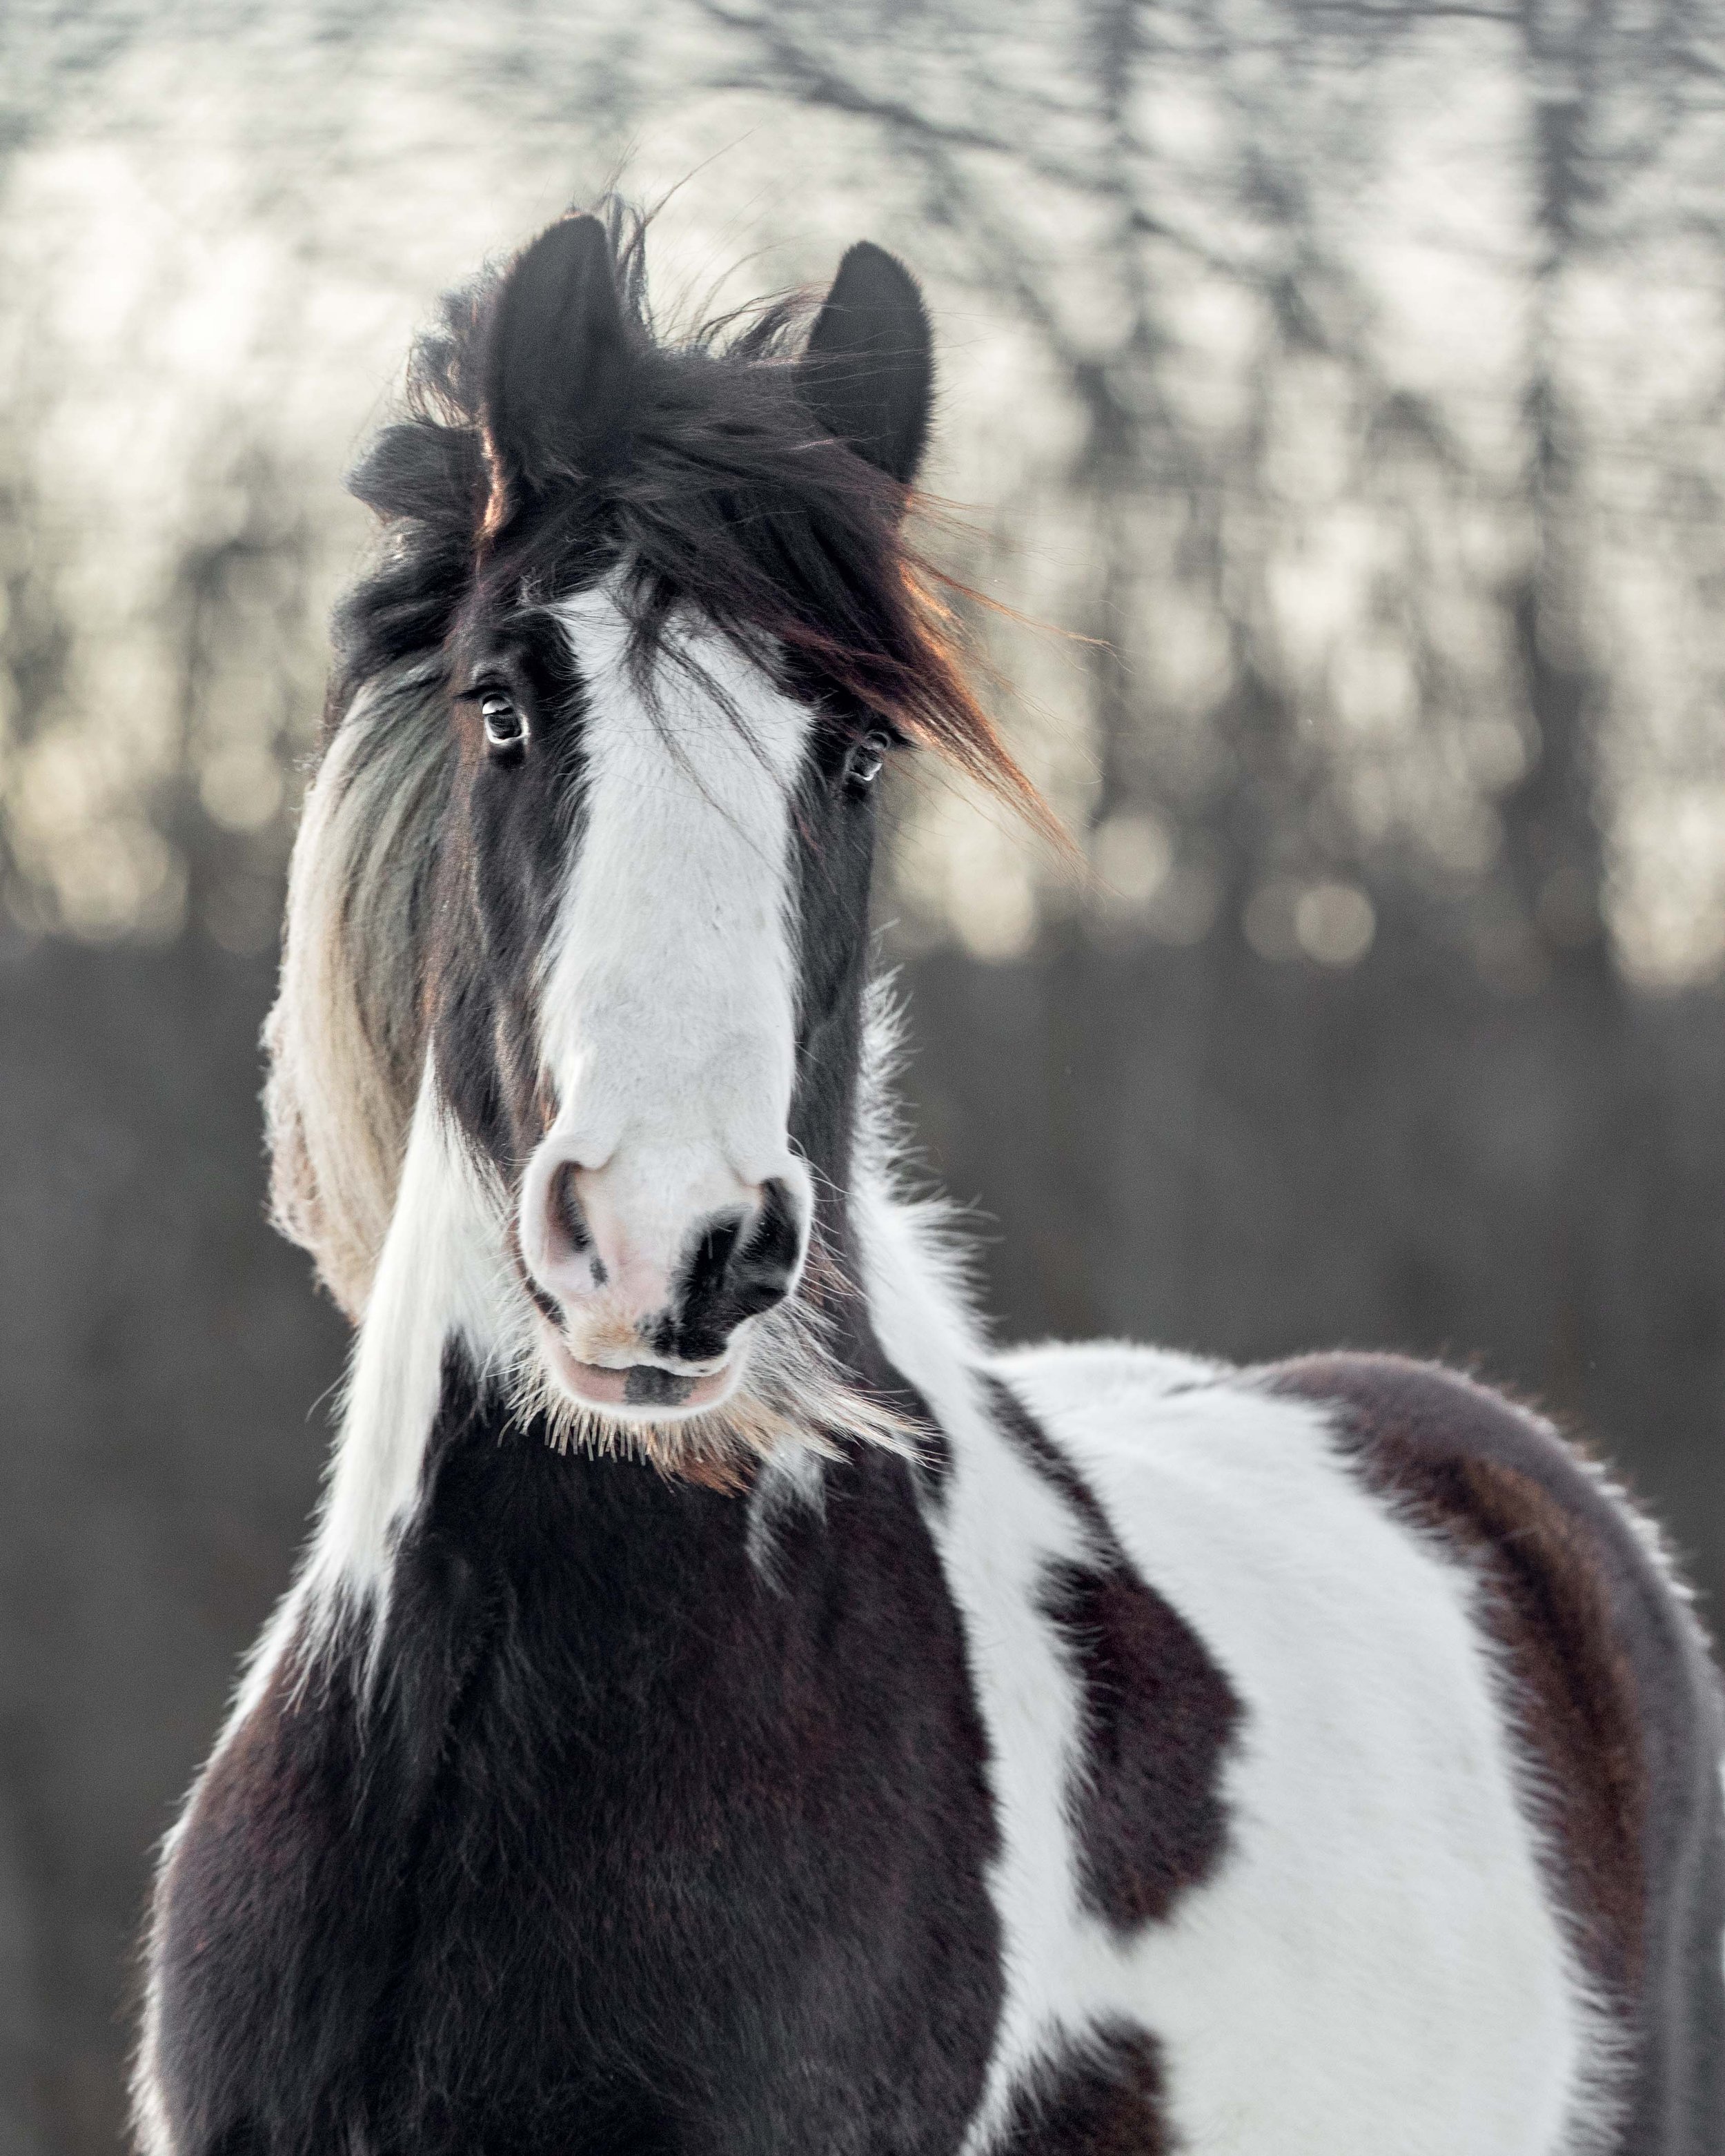 photograph of a gypsy vanner horse in potomac md photographed by Clare Ahalt Photography in Maryland.jpg